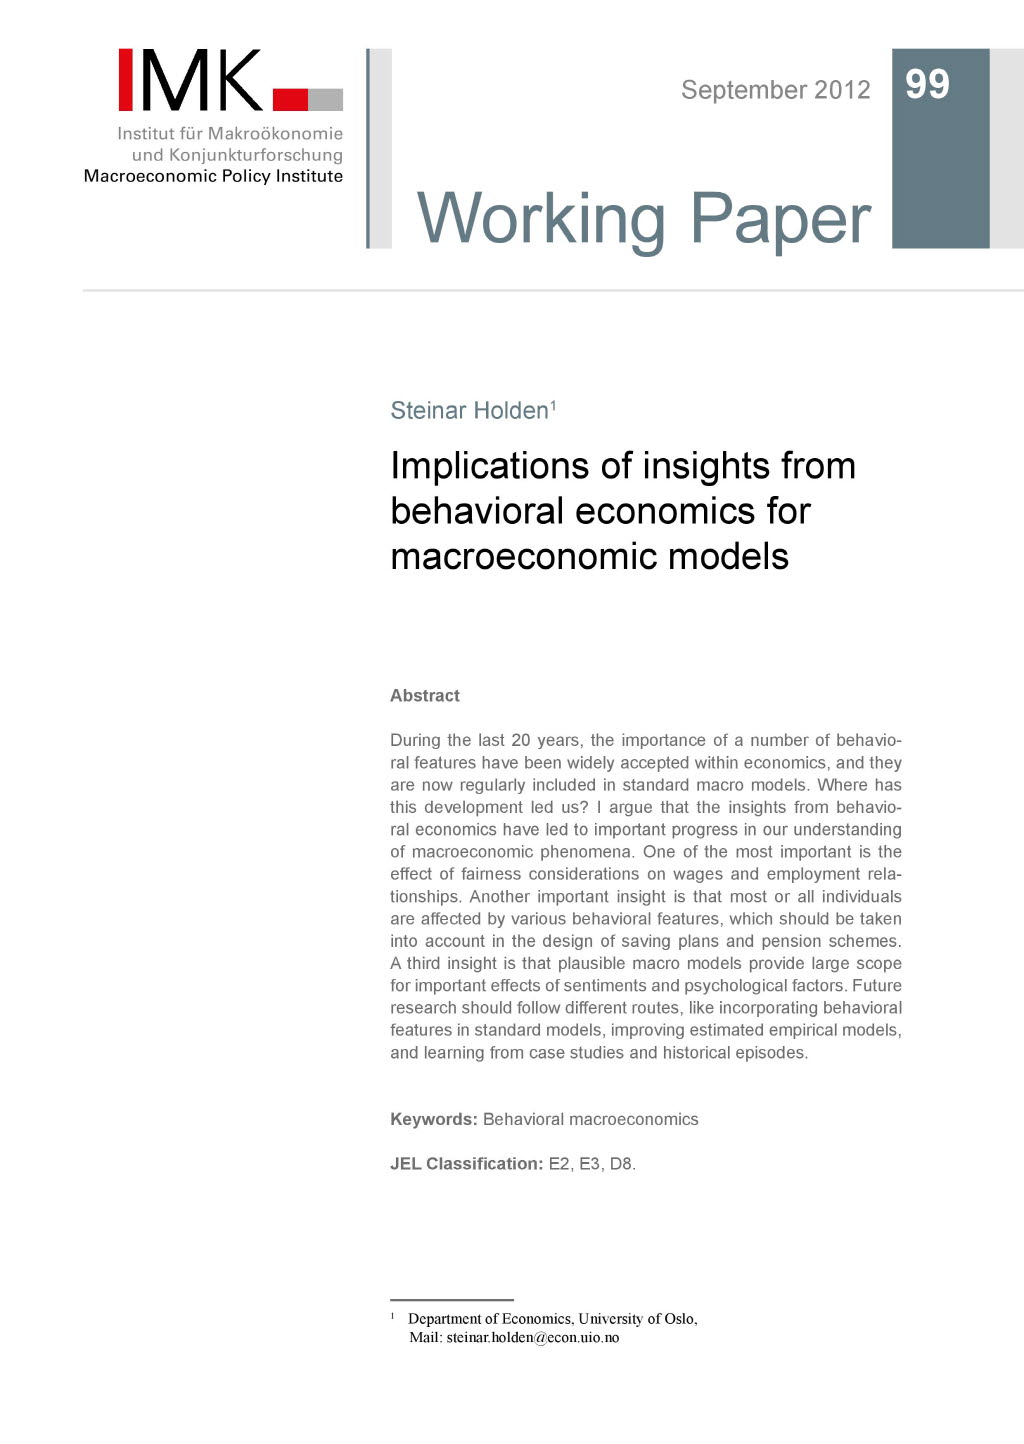 Implications of insights from behavioral economics for macroeconomic models